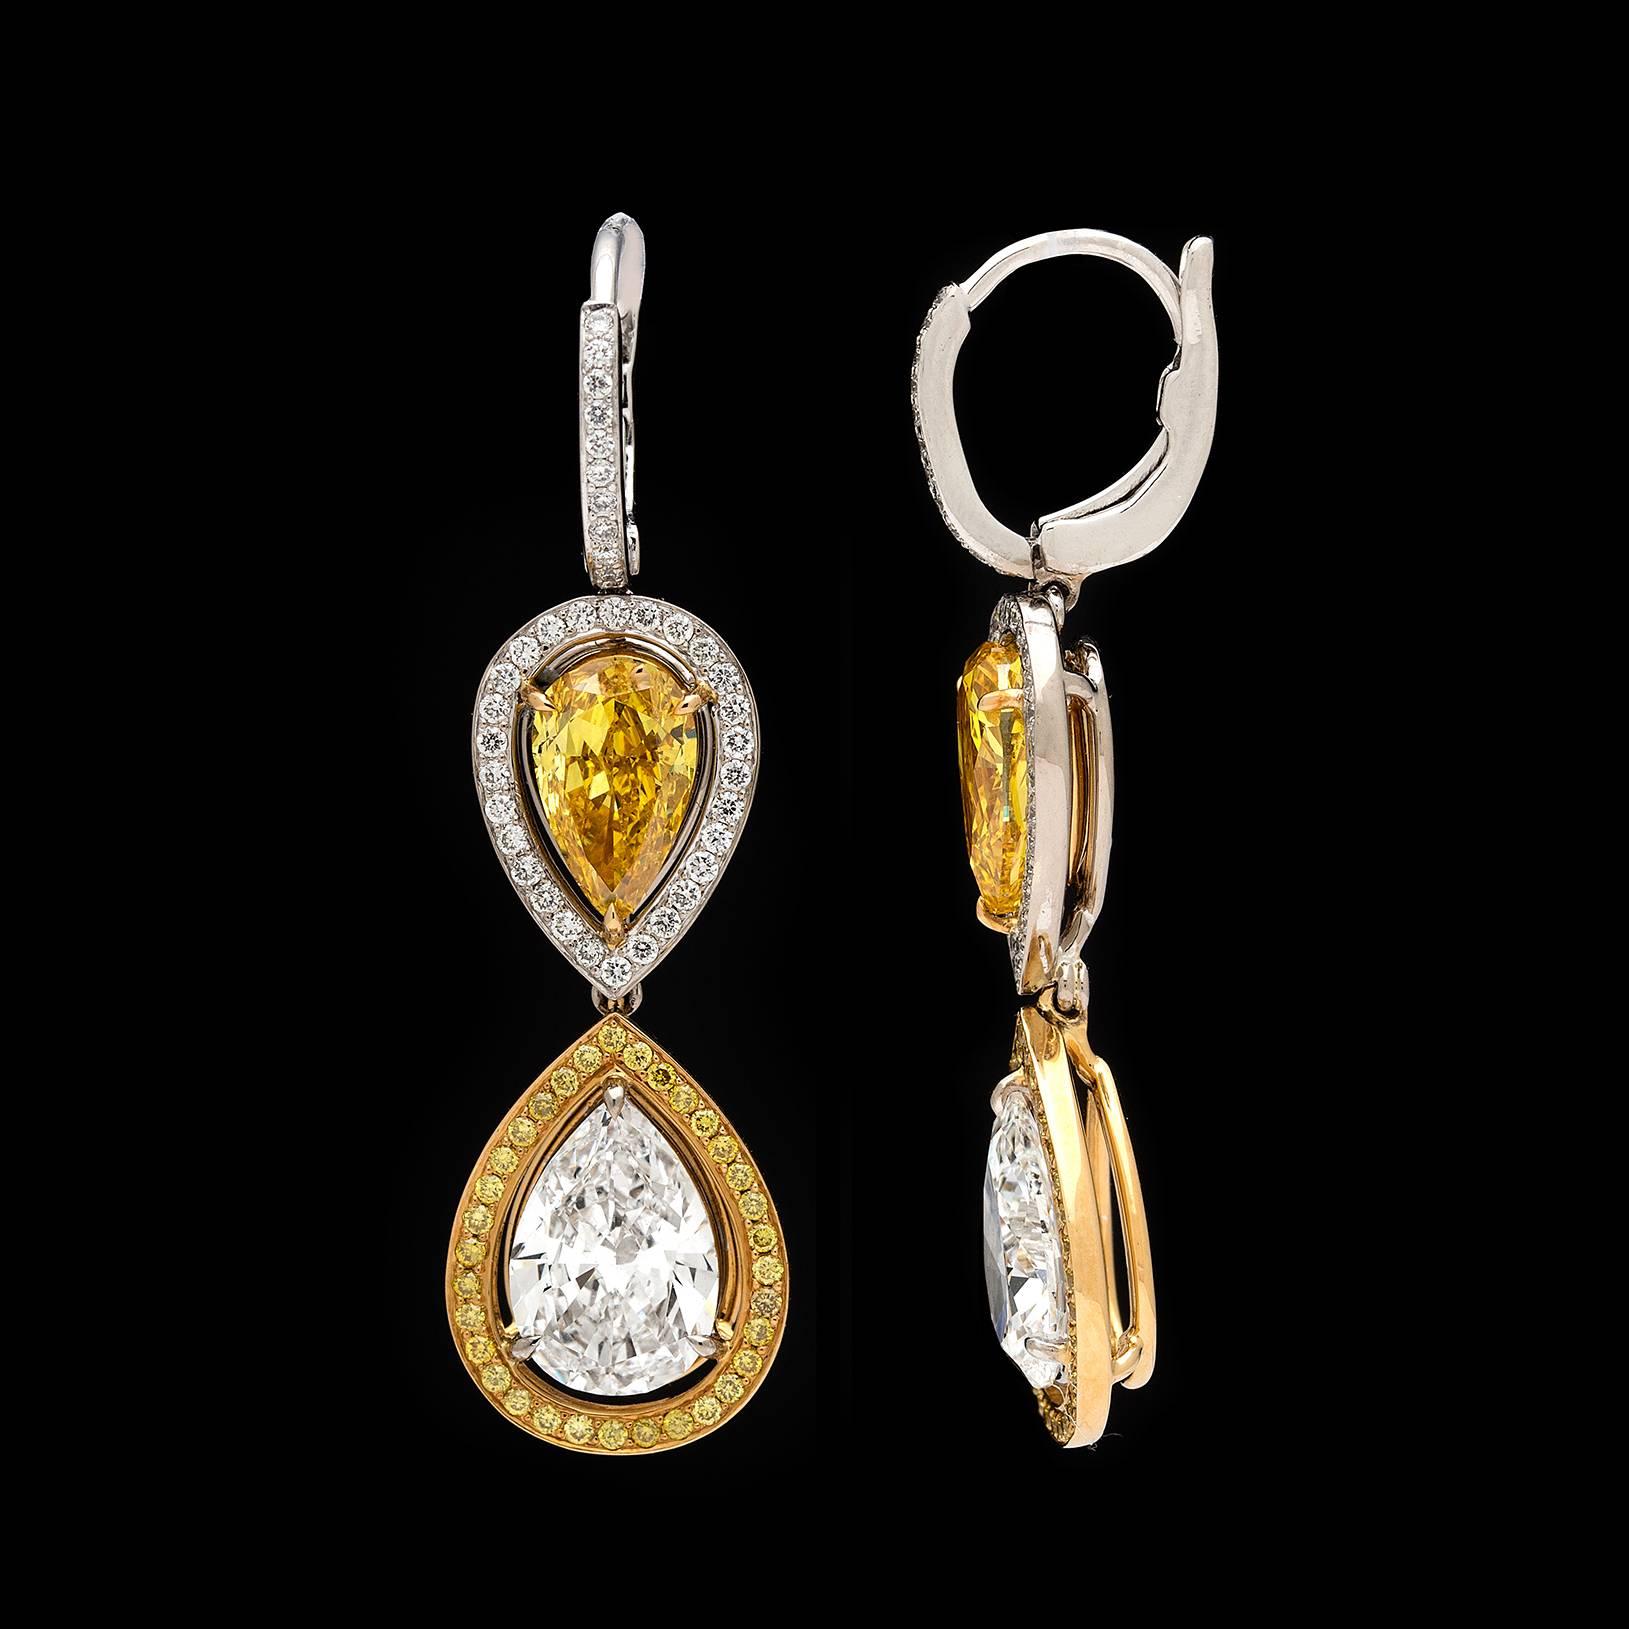 One-of-a-kind incredible 1 white and yellow gold drop earrings each featuring a GIA 1.01-carat Fancy Vivid Yellow and 1.11-carat Fancy Vivid Orangy Yellow pear-shaped diamond, surrounded with near colorless round brilliant-cut diamonds, suspend a